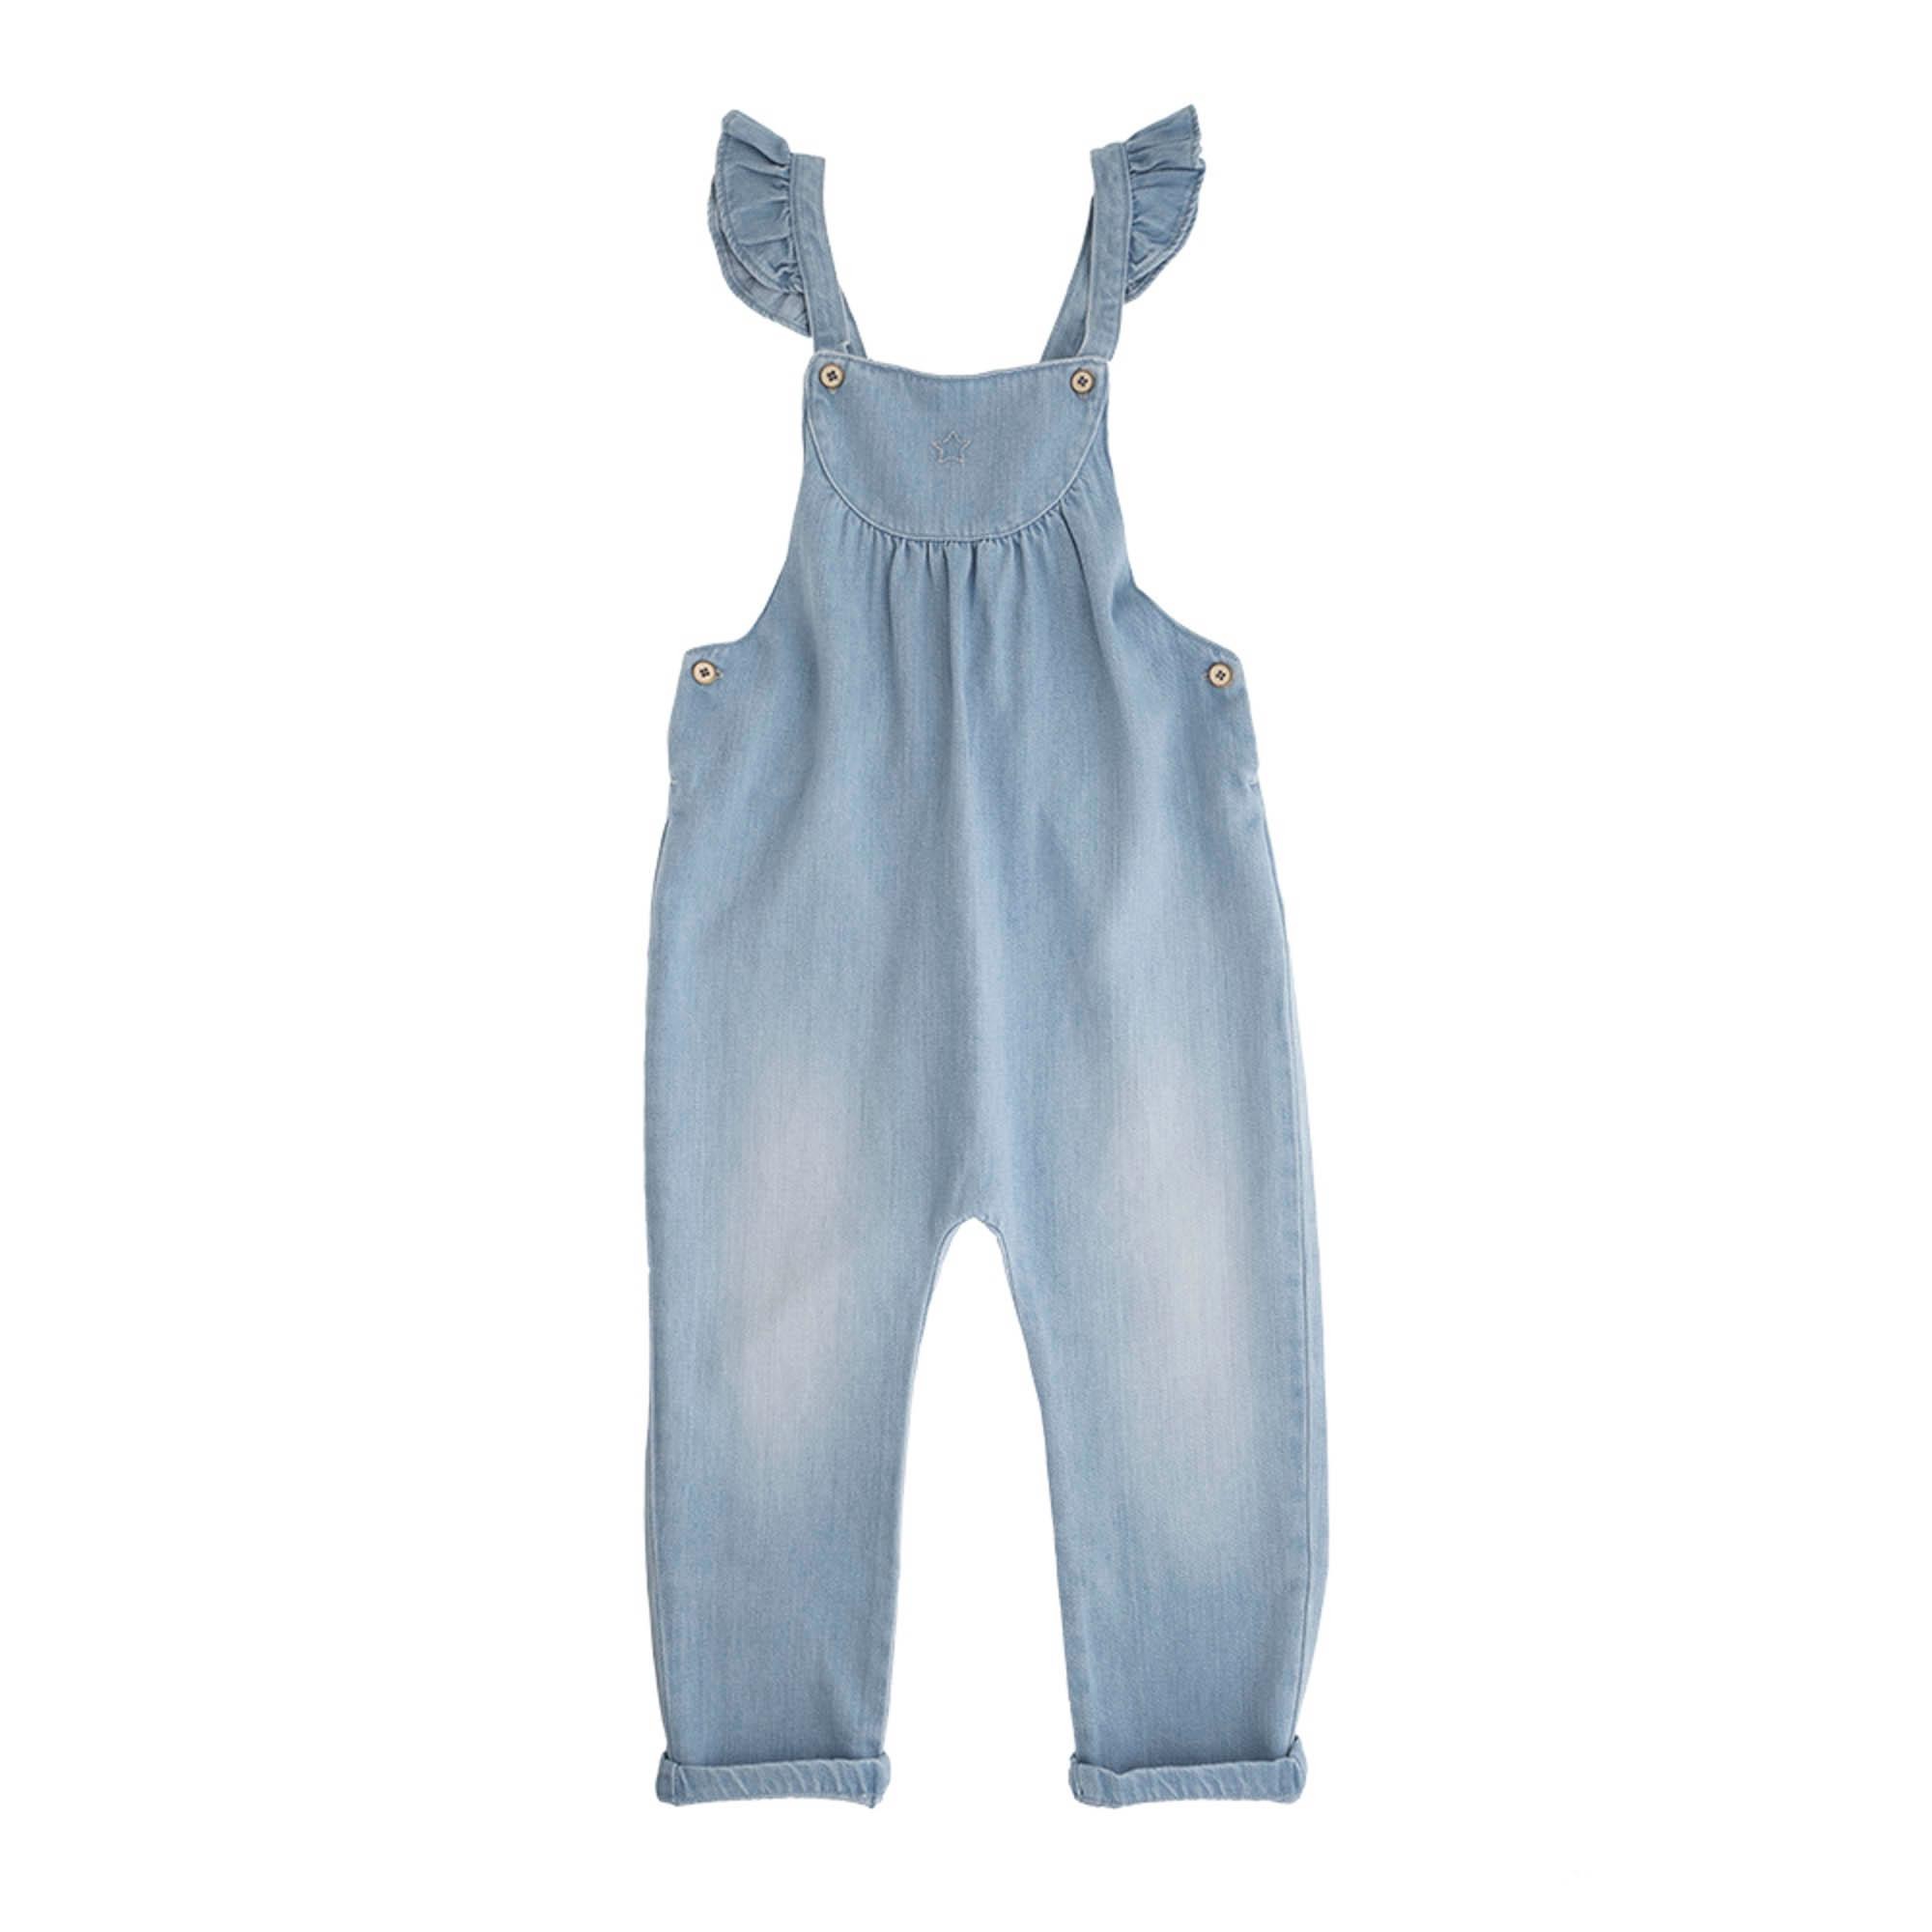 Blue 6-9M KIDS FASHION Baby Jumpsuits & Dungarees Jean discount 73% Zara baby-romper 